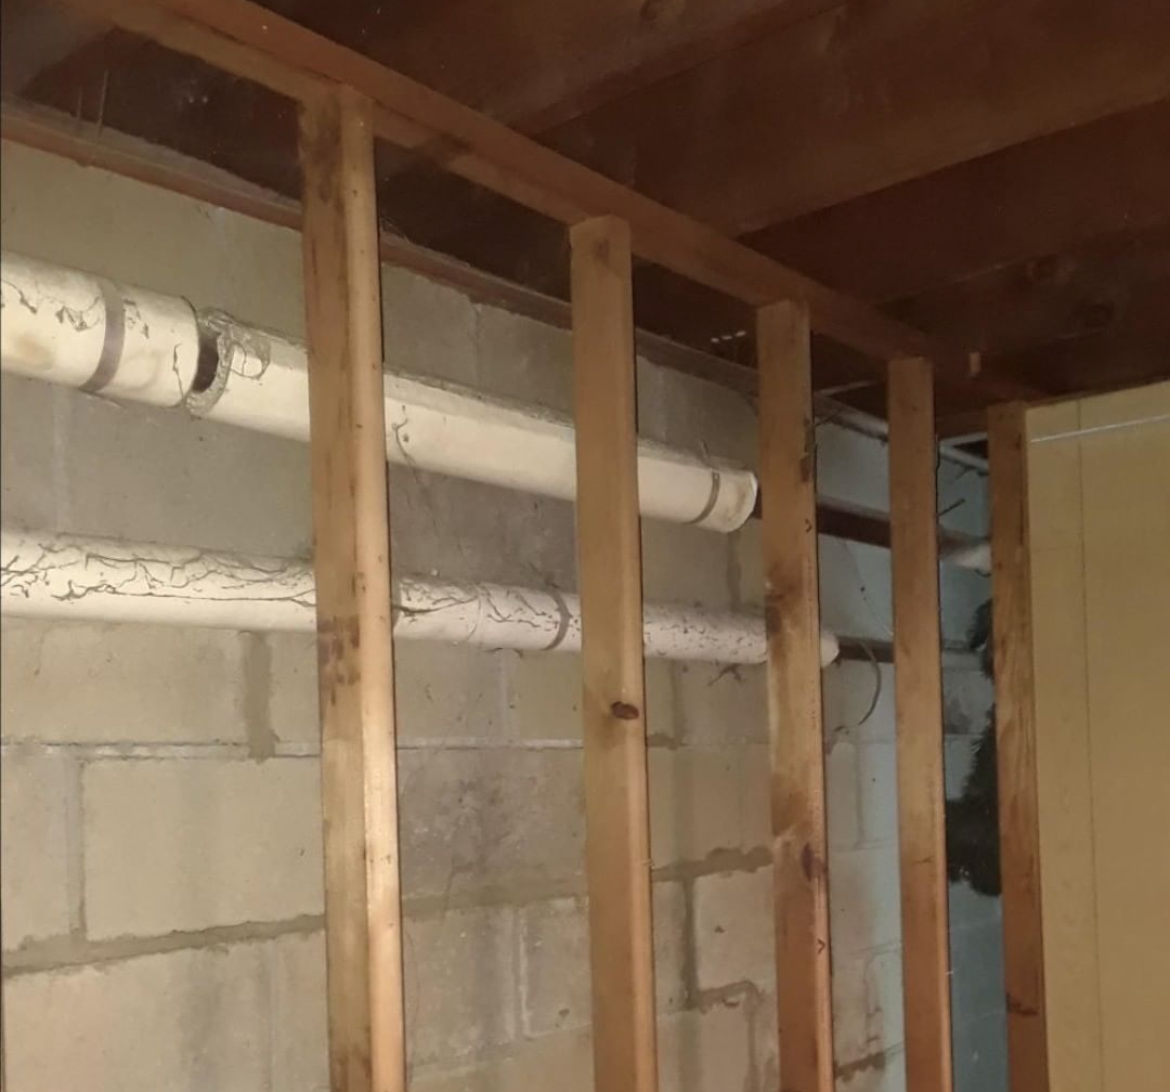 An image showing a wooden stud wall with pipes behind wrapped in pipe insulation. Gaps shown in the insulation and cracks formed.